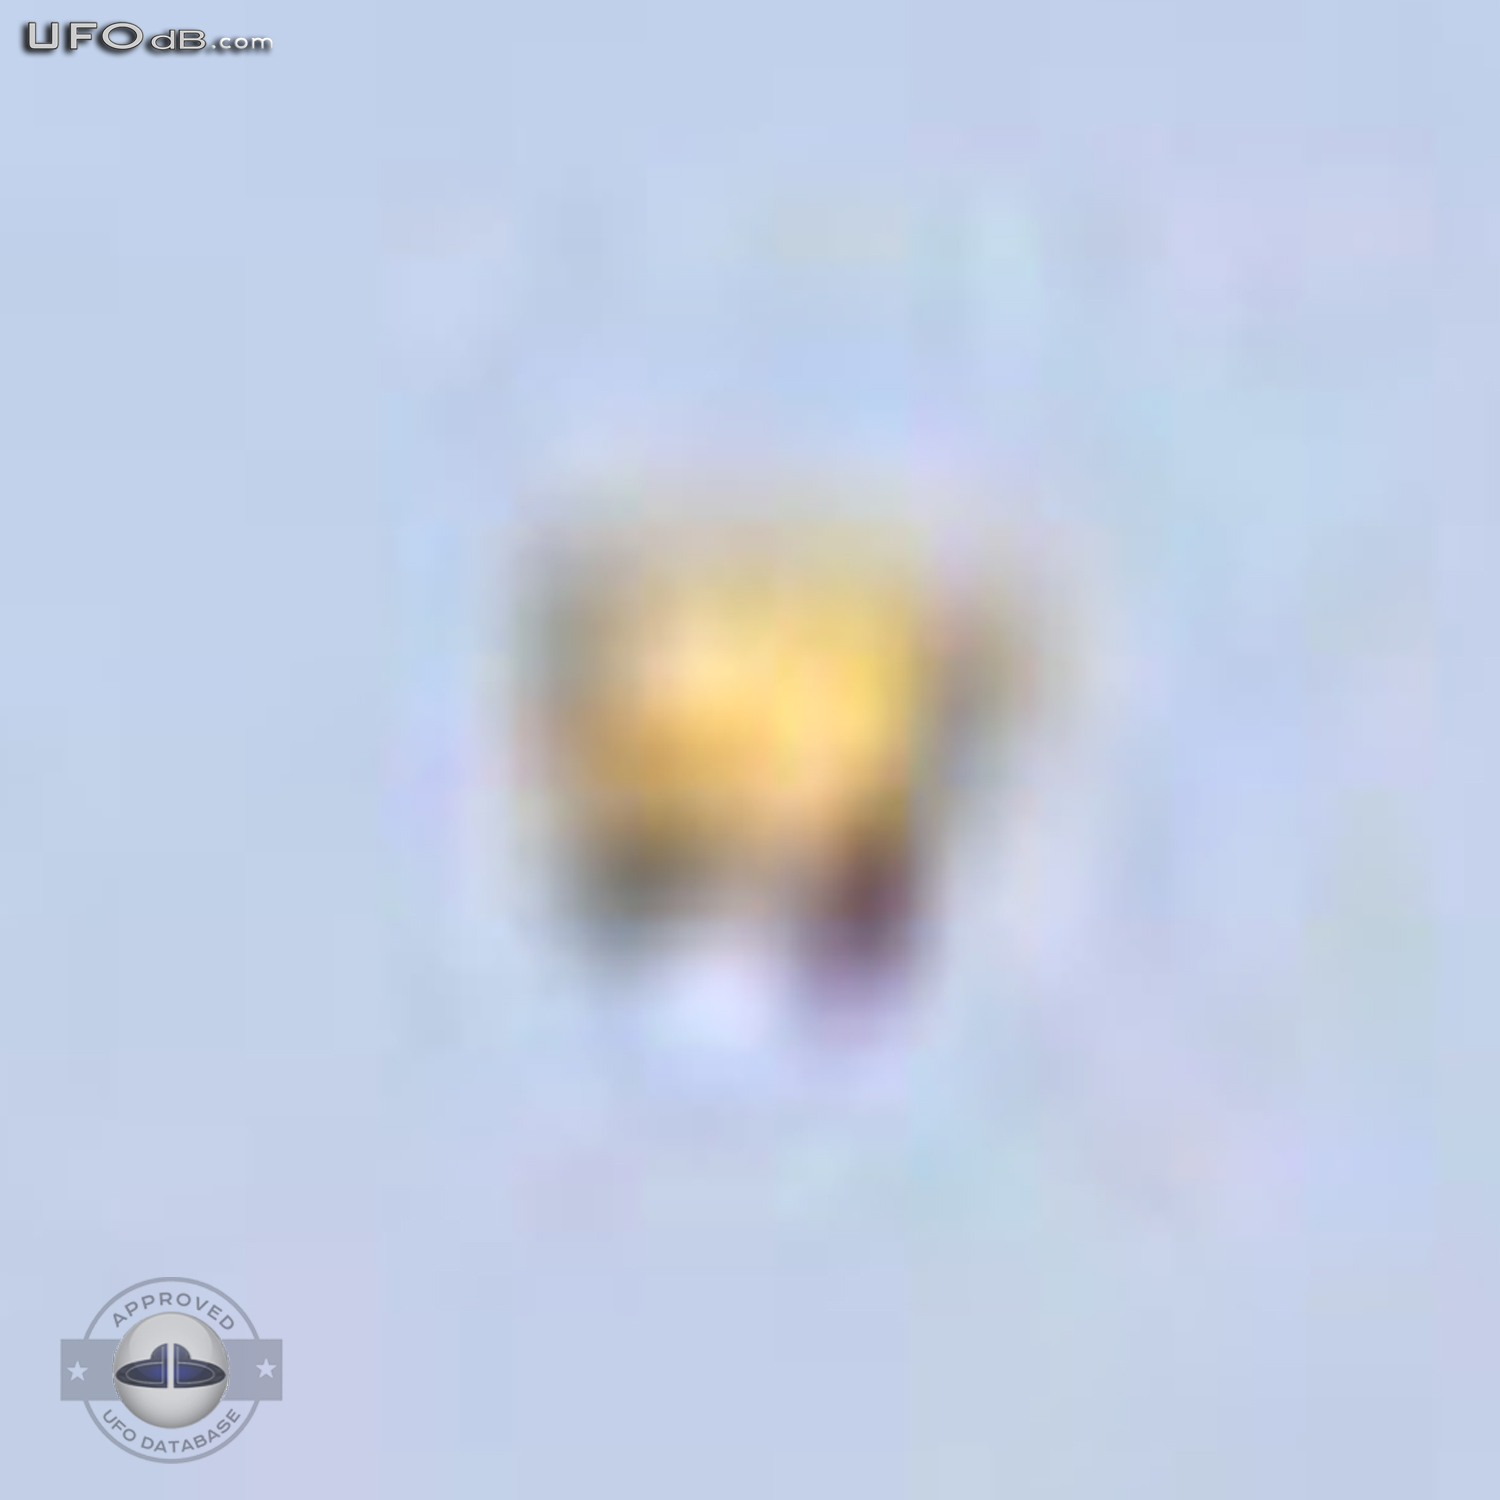 Family in Argentina blames a UFO for their sickness | February 28 2011 UFO Picture #271-6